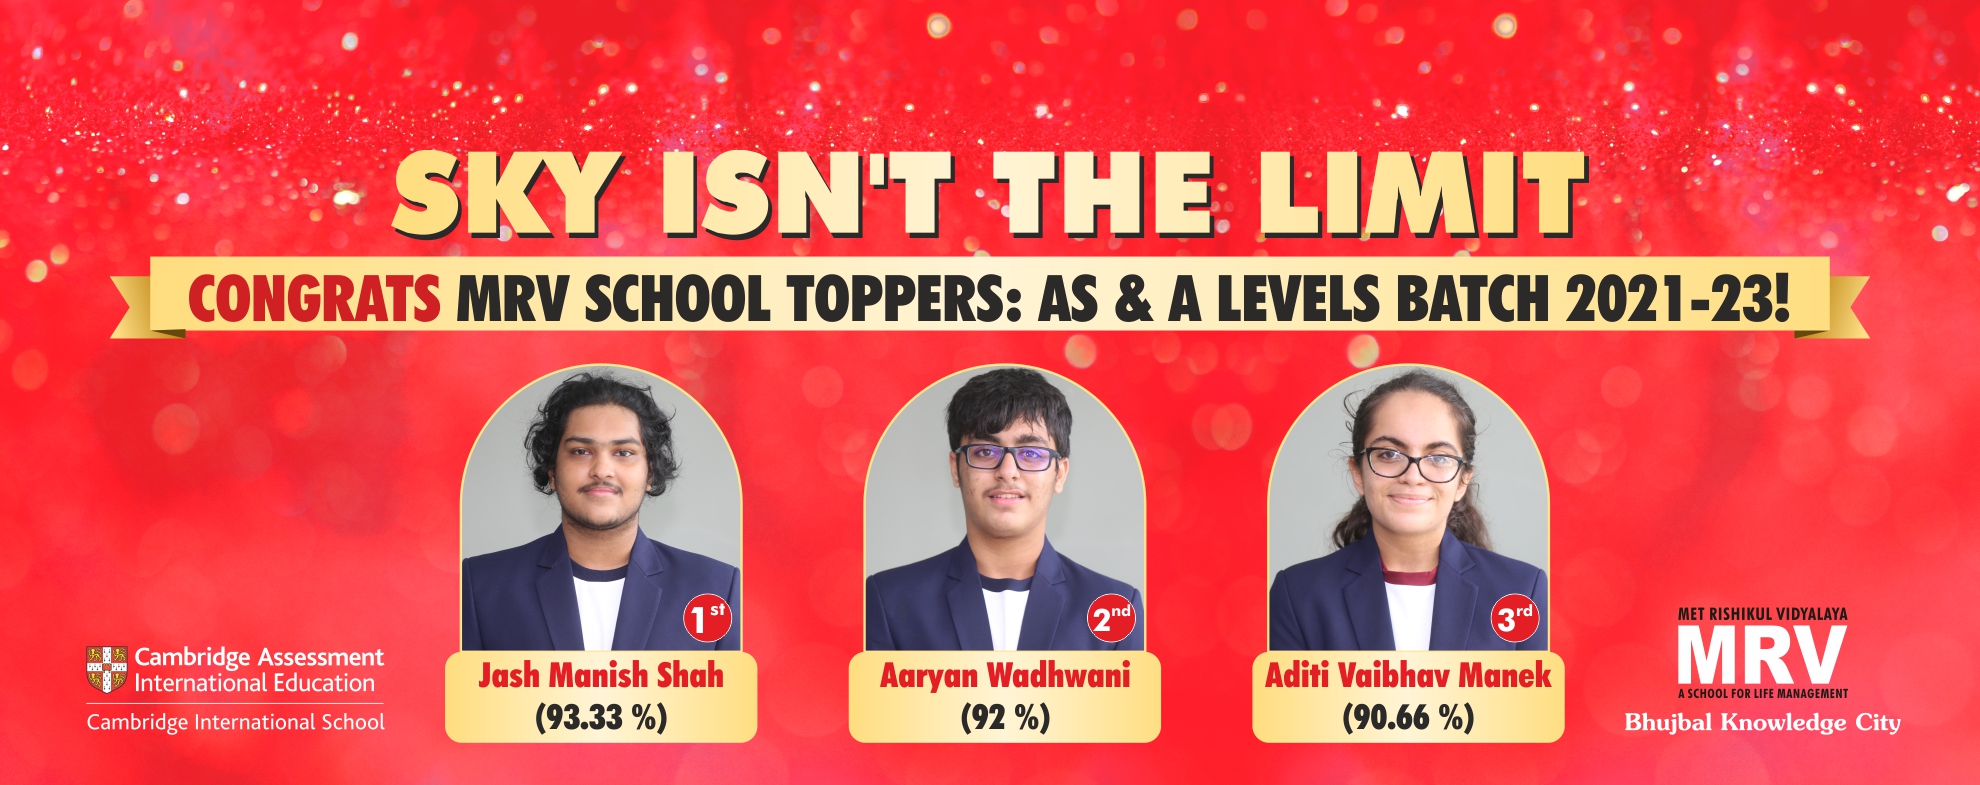 MRV A LEVELS SCHOOL TOPPERS